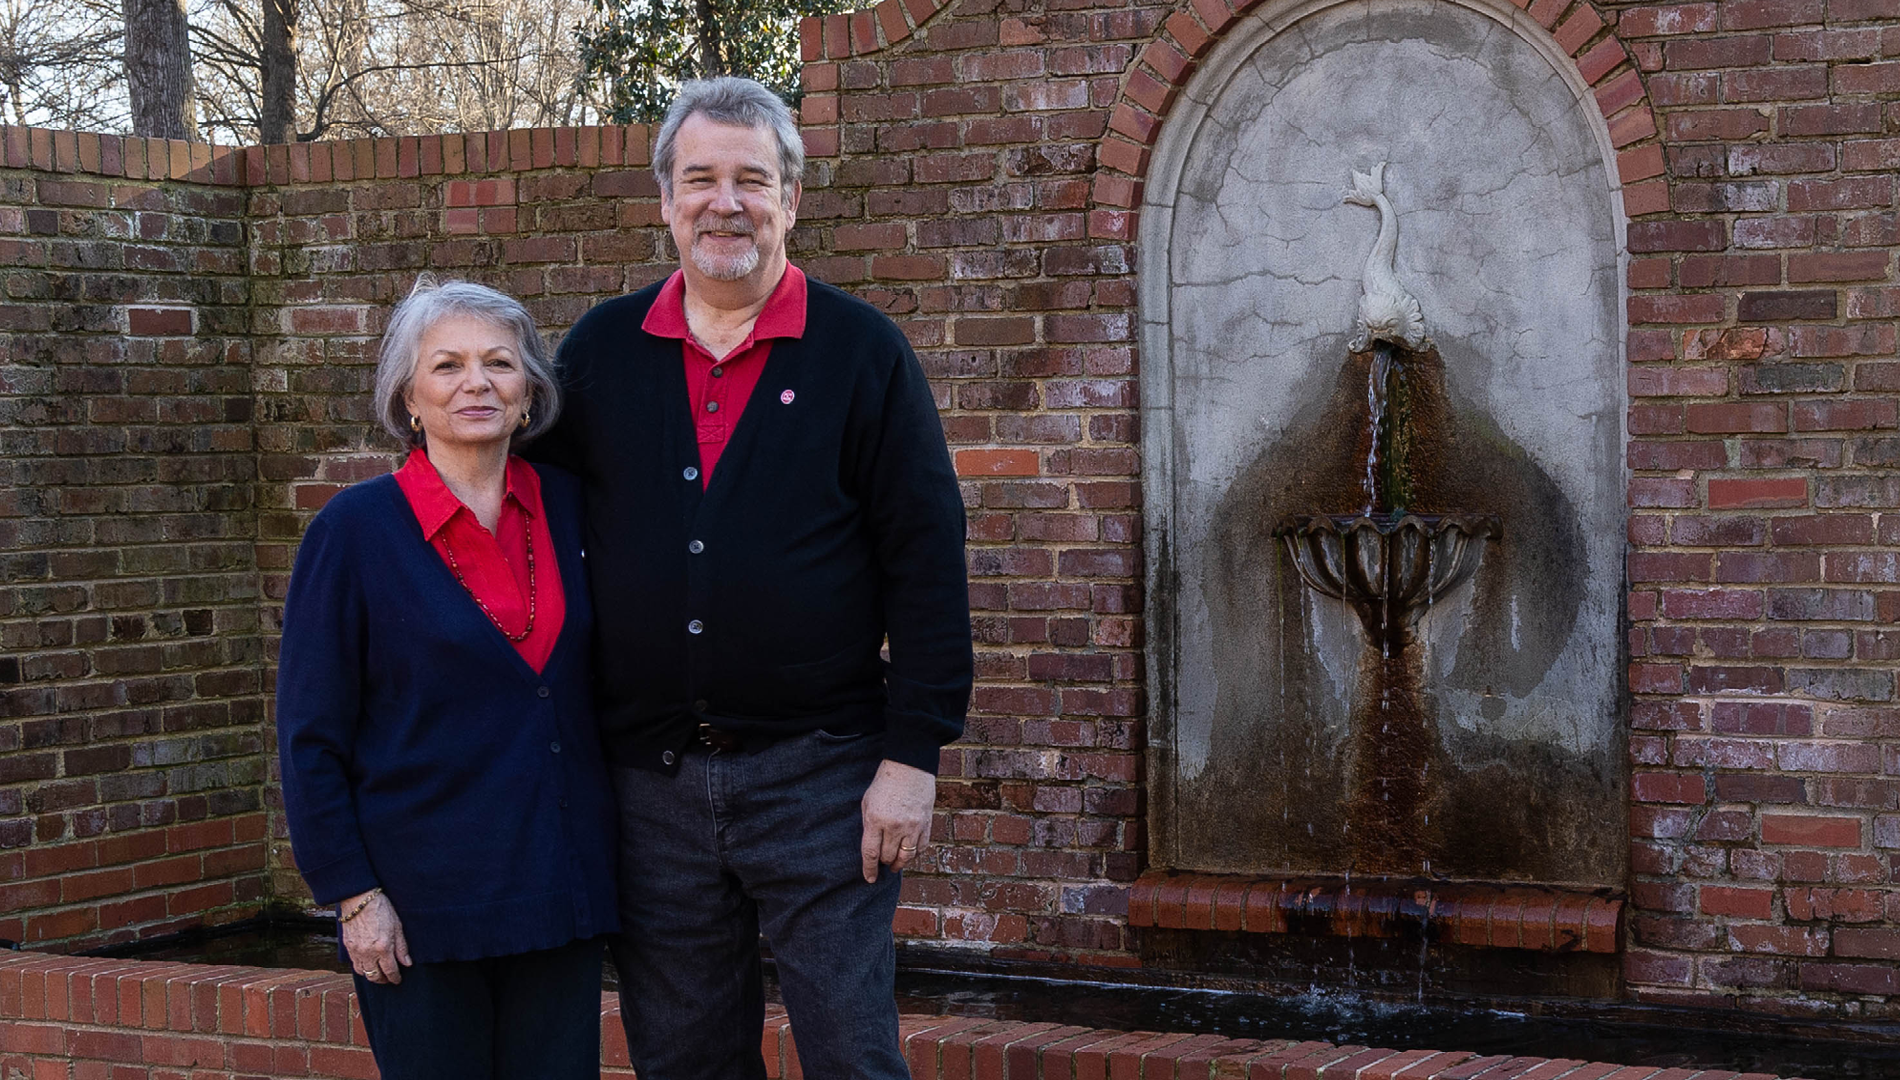 David and Judi Wilkinson honor their longtime ties to Arts NC State with the creation of the Pearsall-Wilkinson Scholarship Endowment